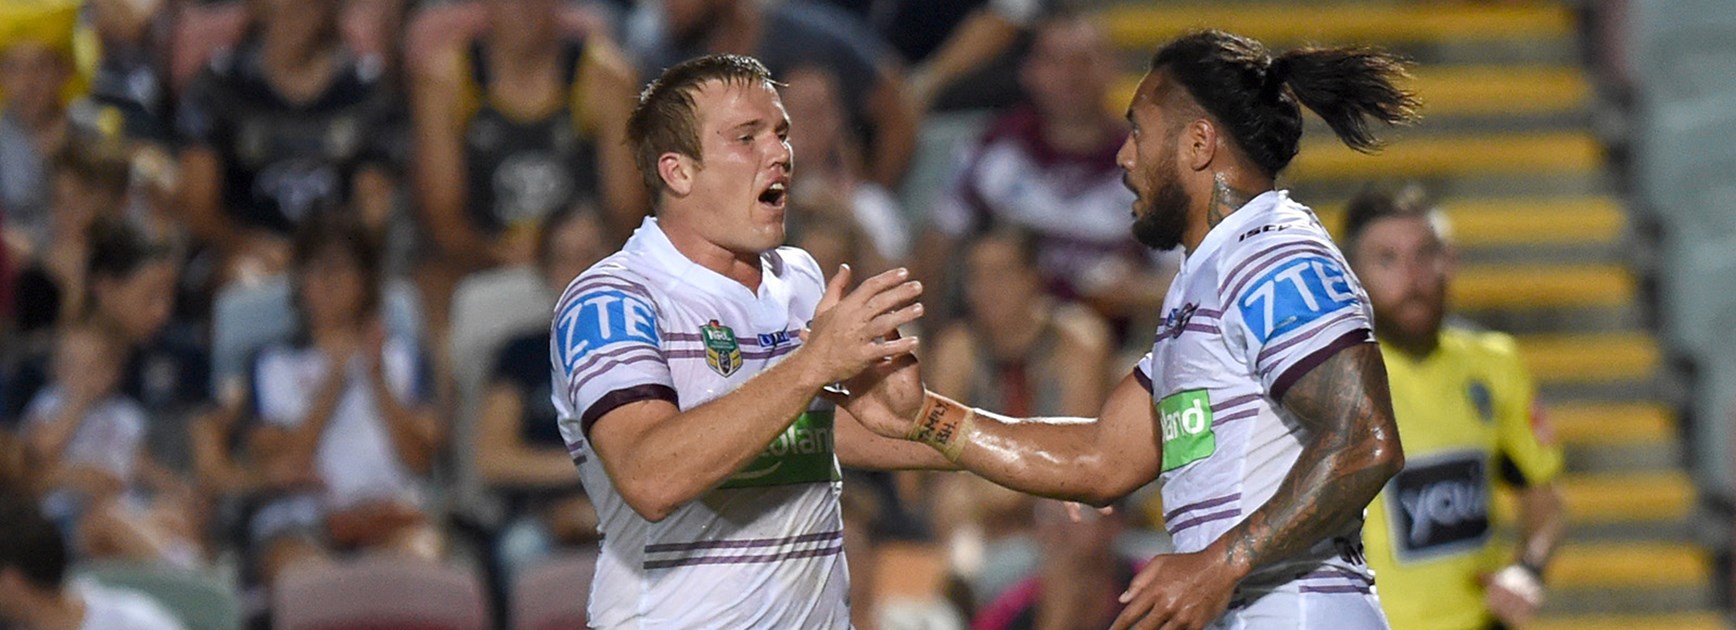 Manly celebrate a try against the Cowboys in Round 3.